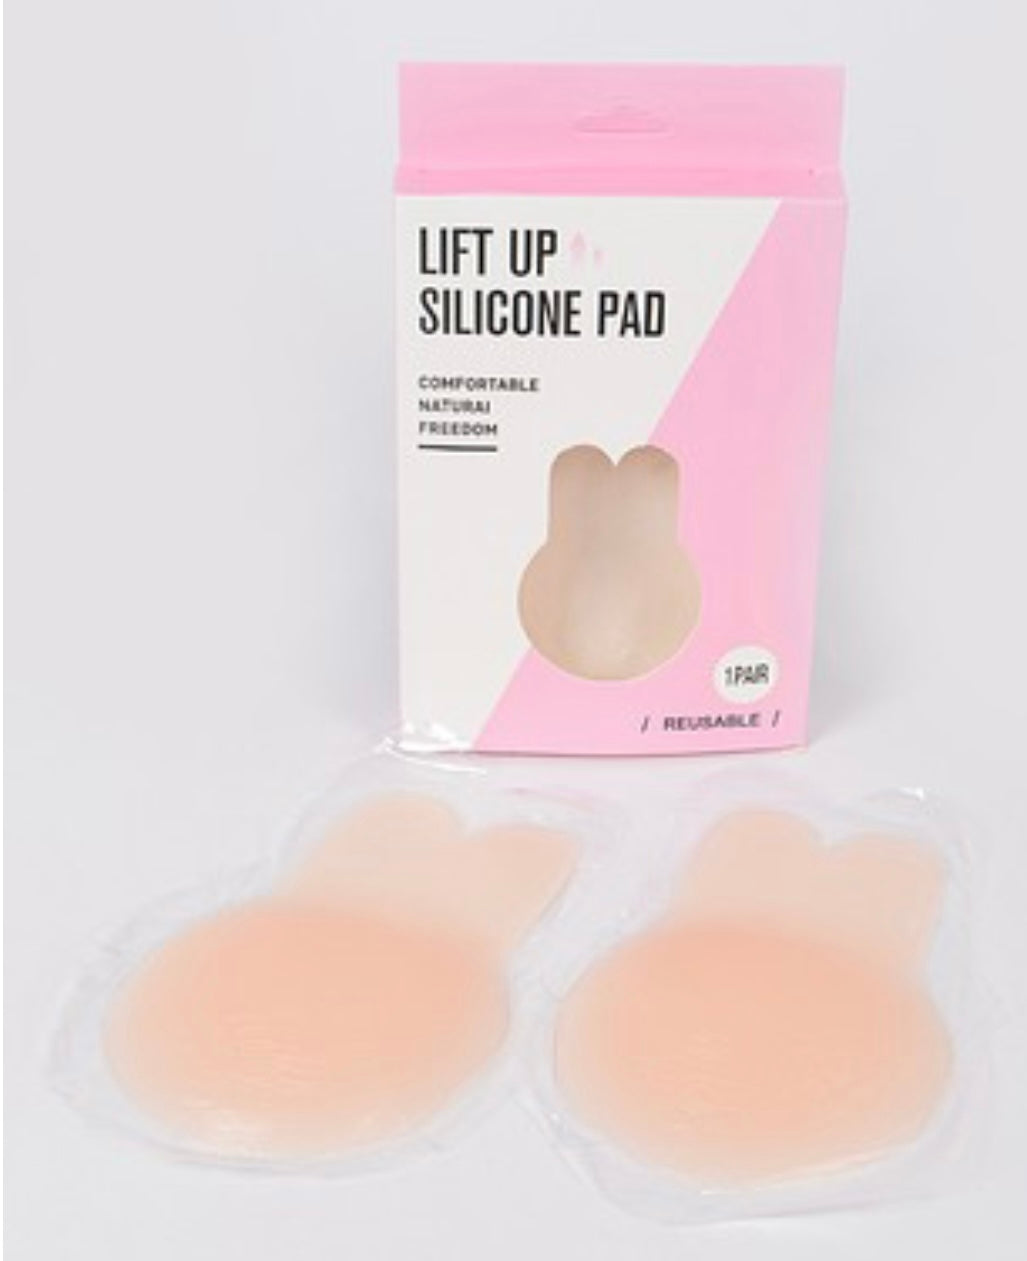 Adhesive Nude Silicone Breast Lift Up pad